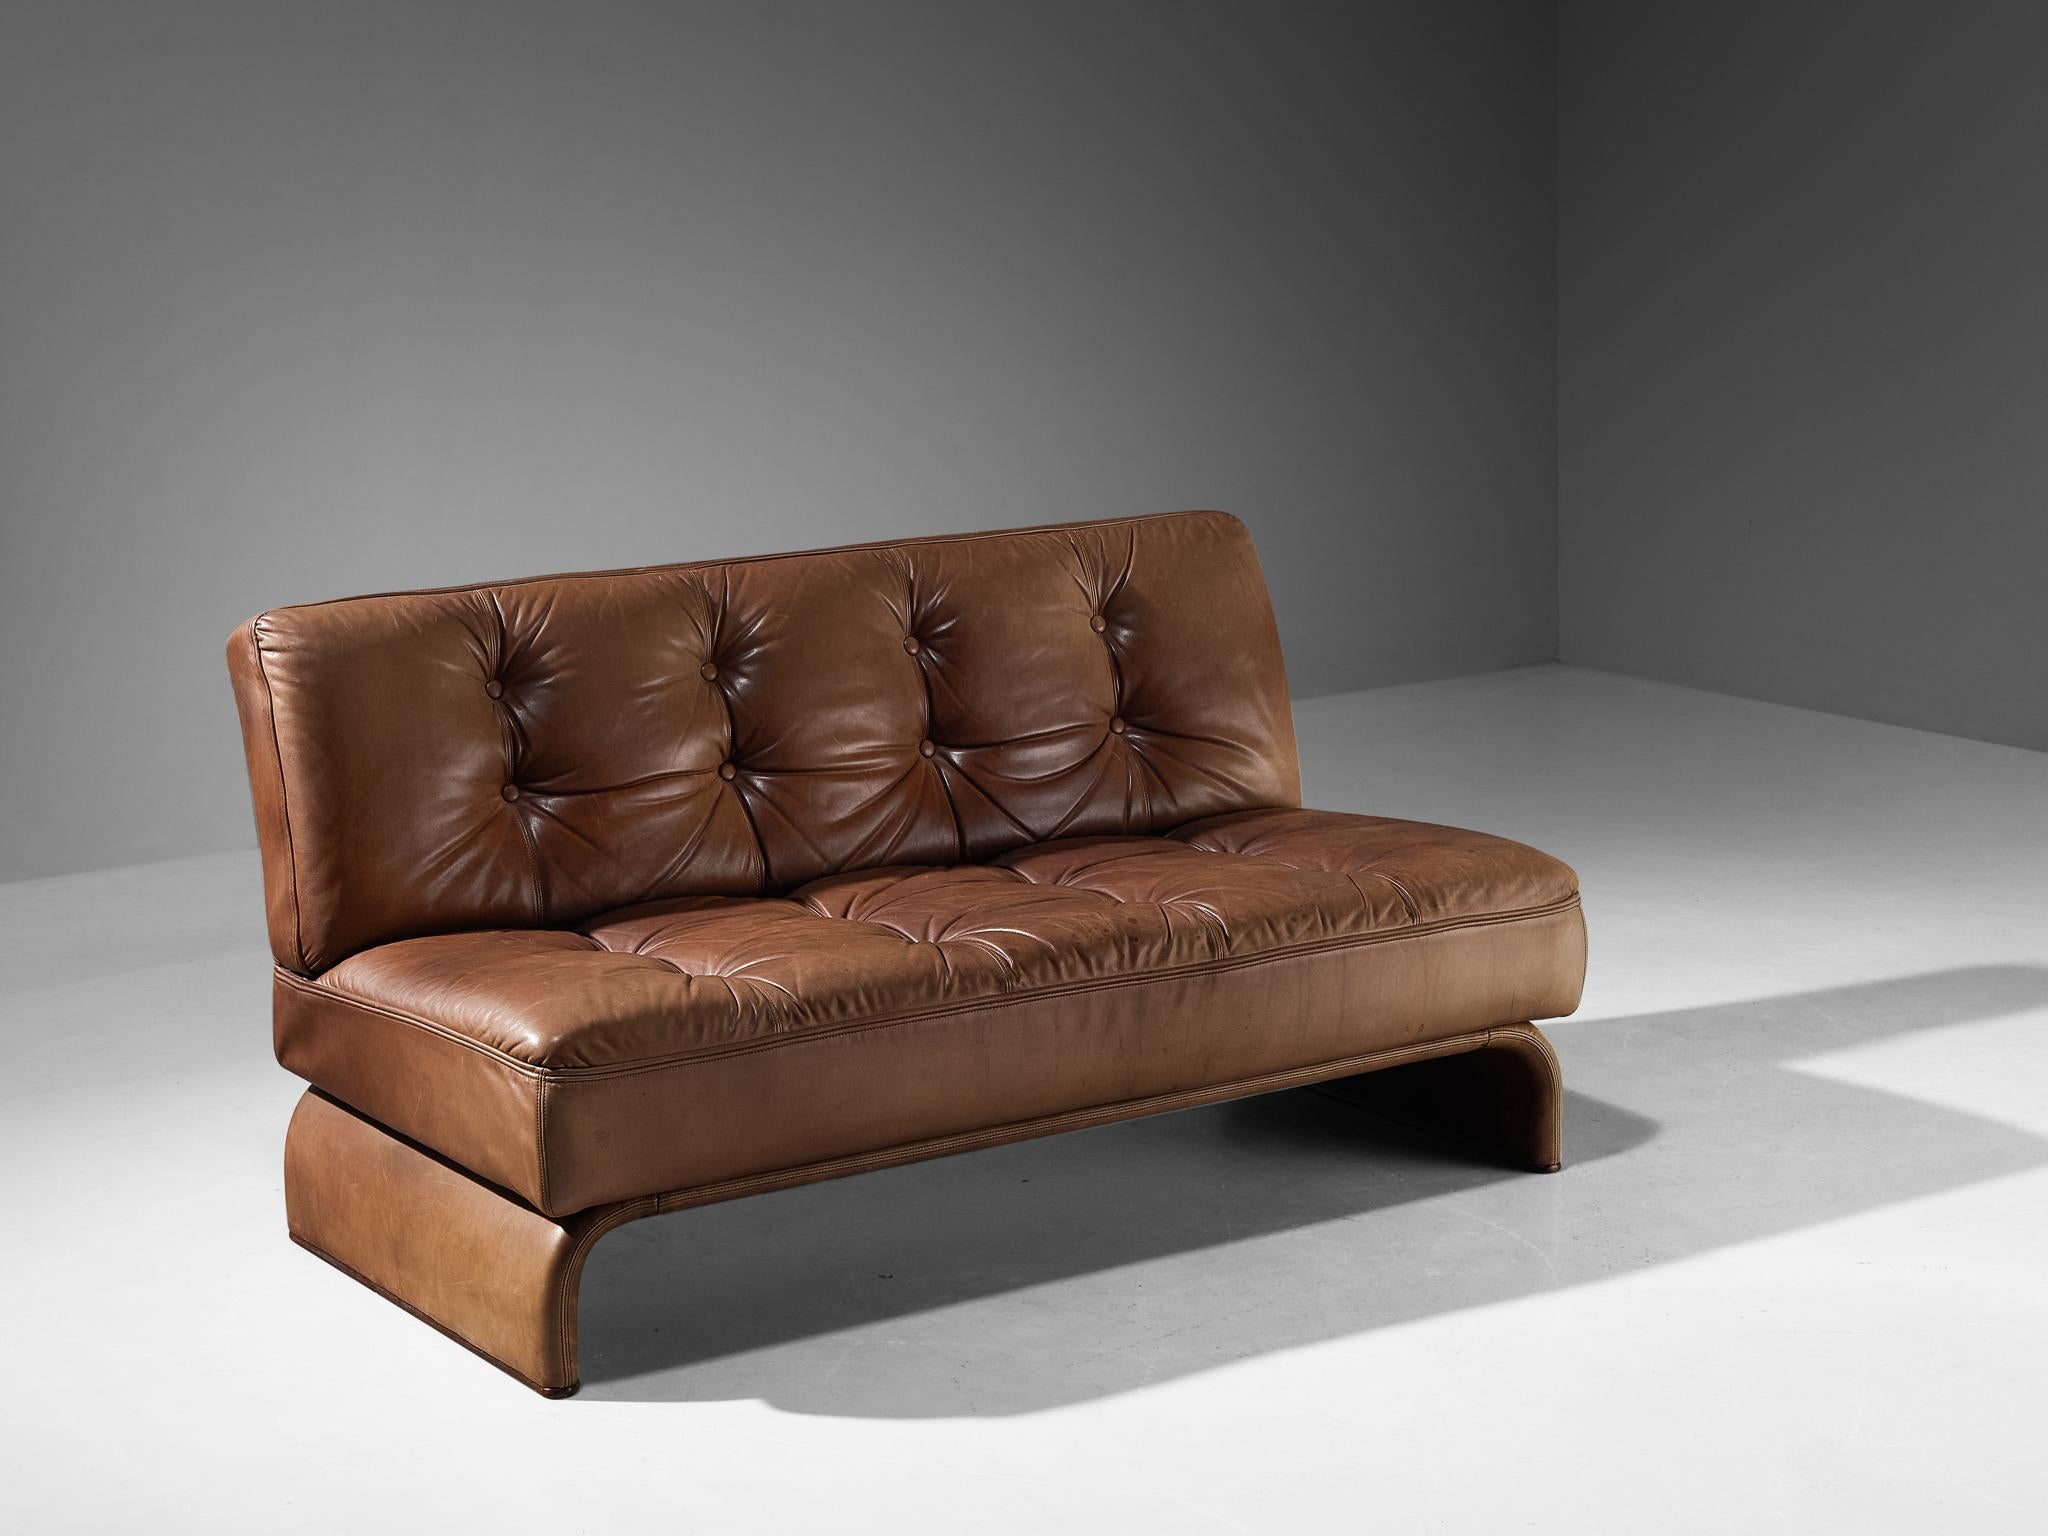 Johannes Spalt for Wittmann, 'Constanze' daybed or sofa, cognac leather, metal, Austria, 1960s. 

This sofa or daybed, designed by architect Johannes Spalt, is typical for mid-century modern design from Austria of the 1960s. The tufted cognac